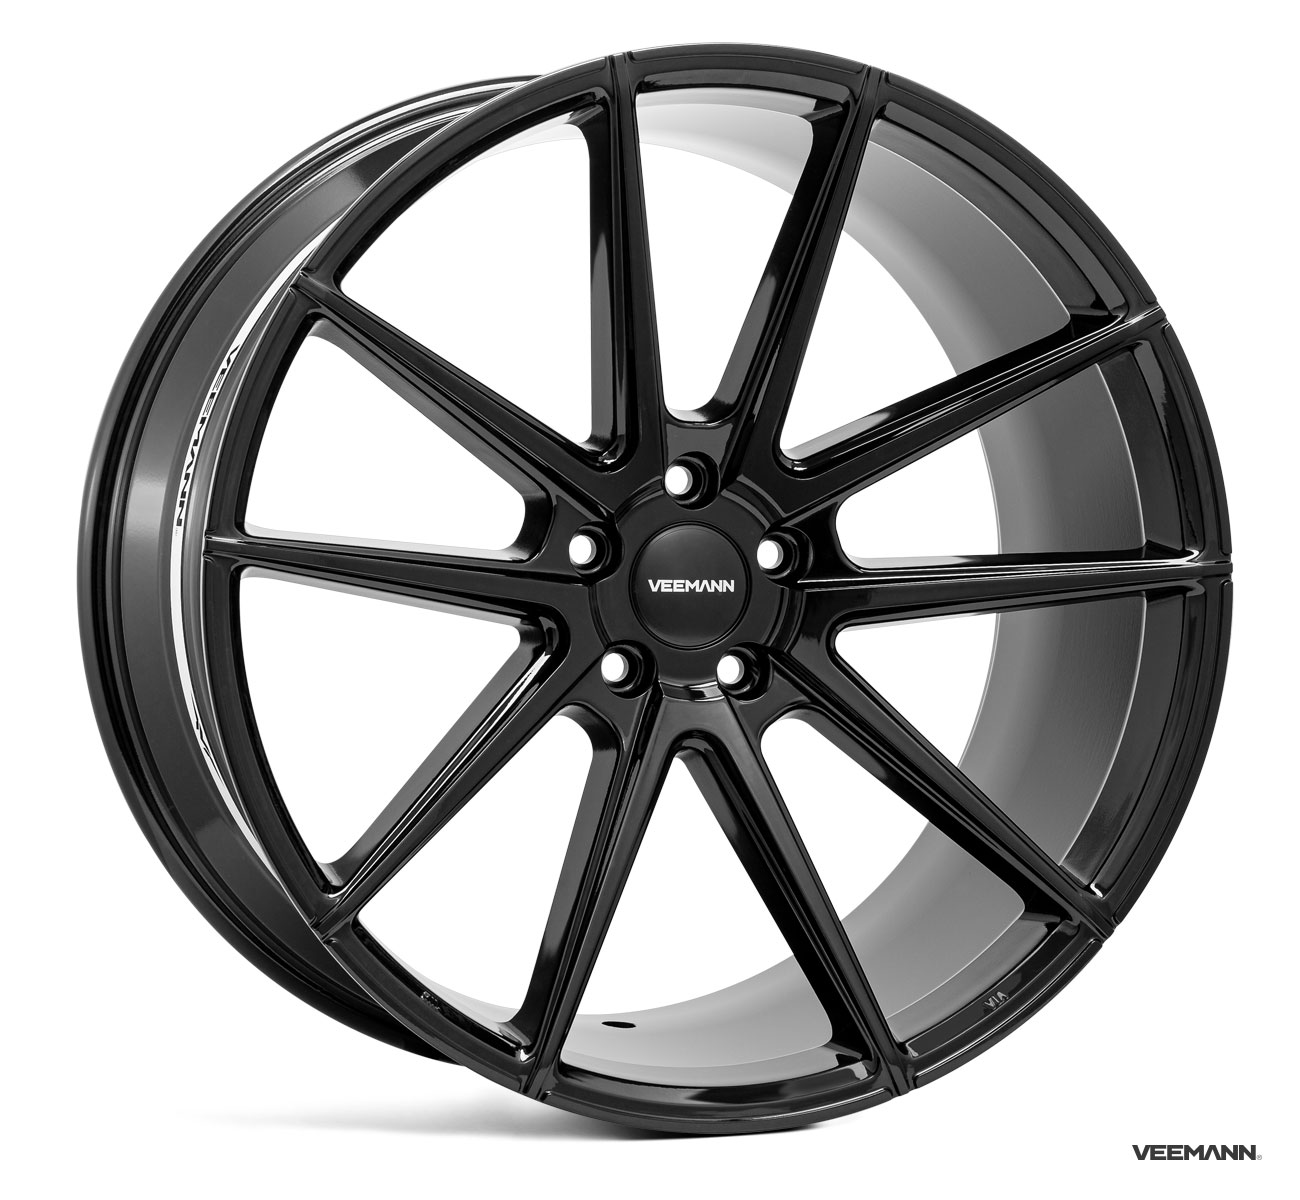 NEW 21" VEEMANN V-FS4 ALLOY WHEELS IN GLOSS BLACK WITH DEEPER CONCAVE 10.5" REARS et35/et43